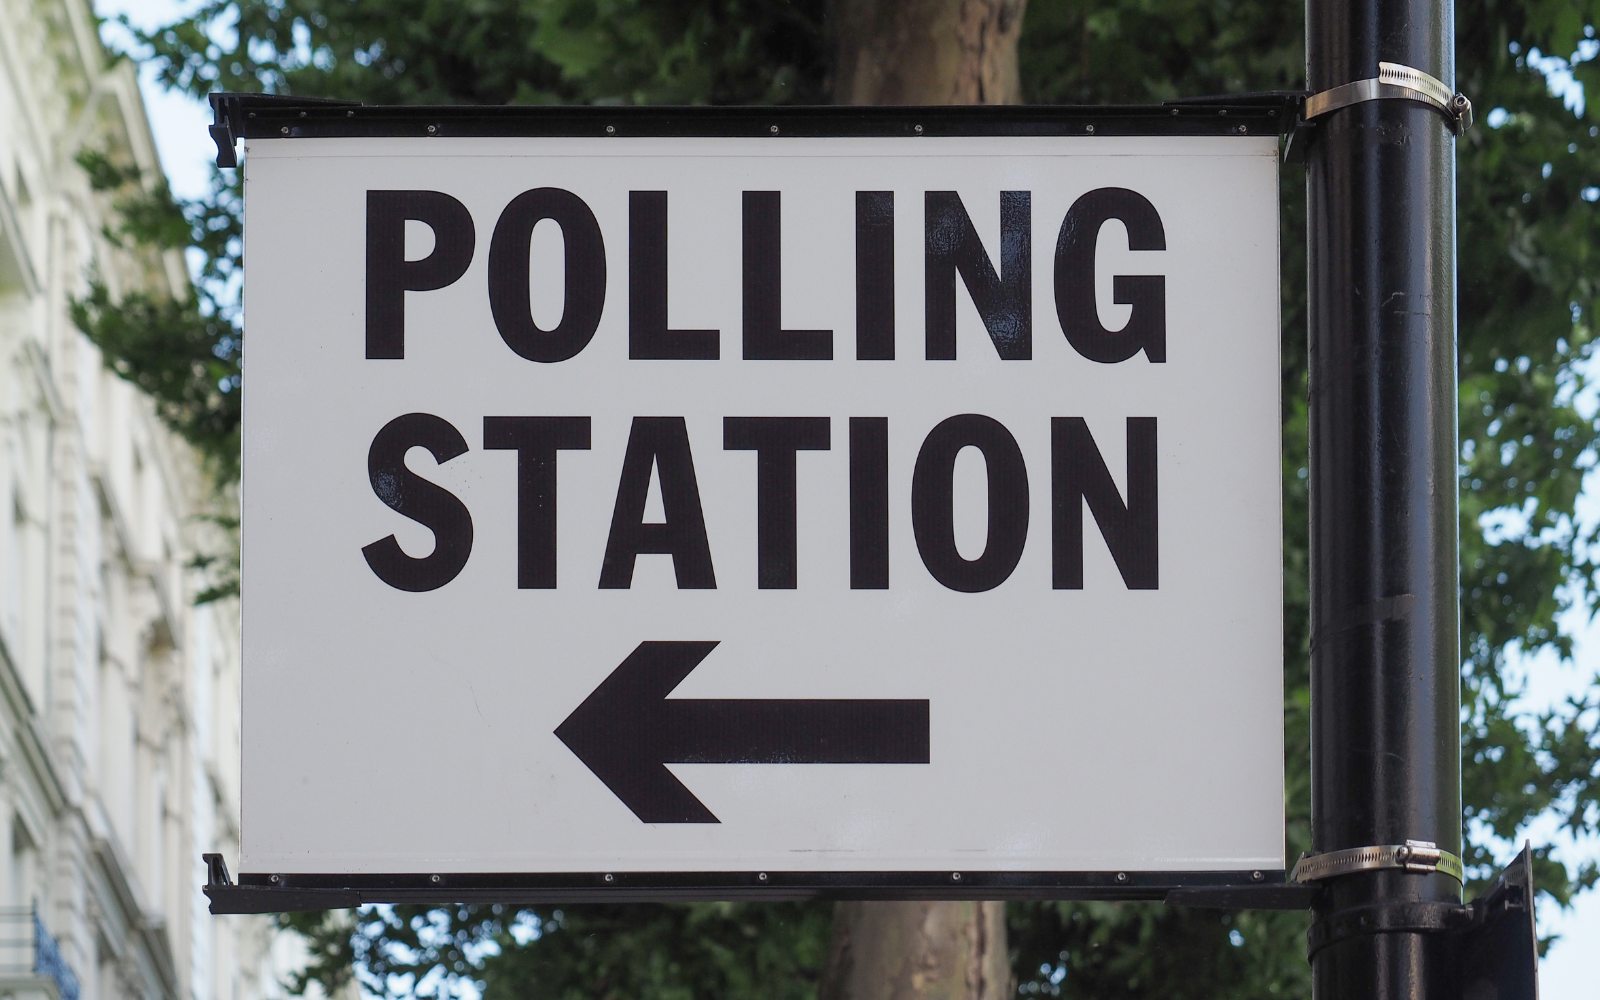 A polling station sign.